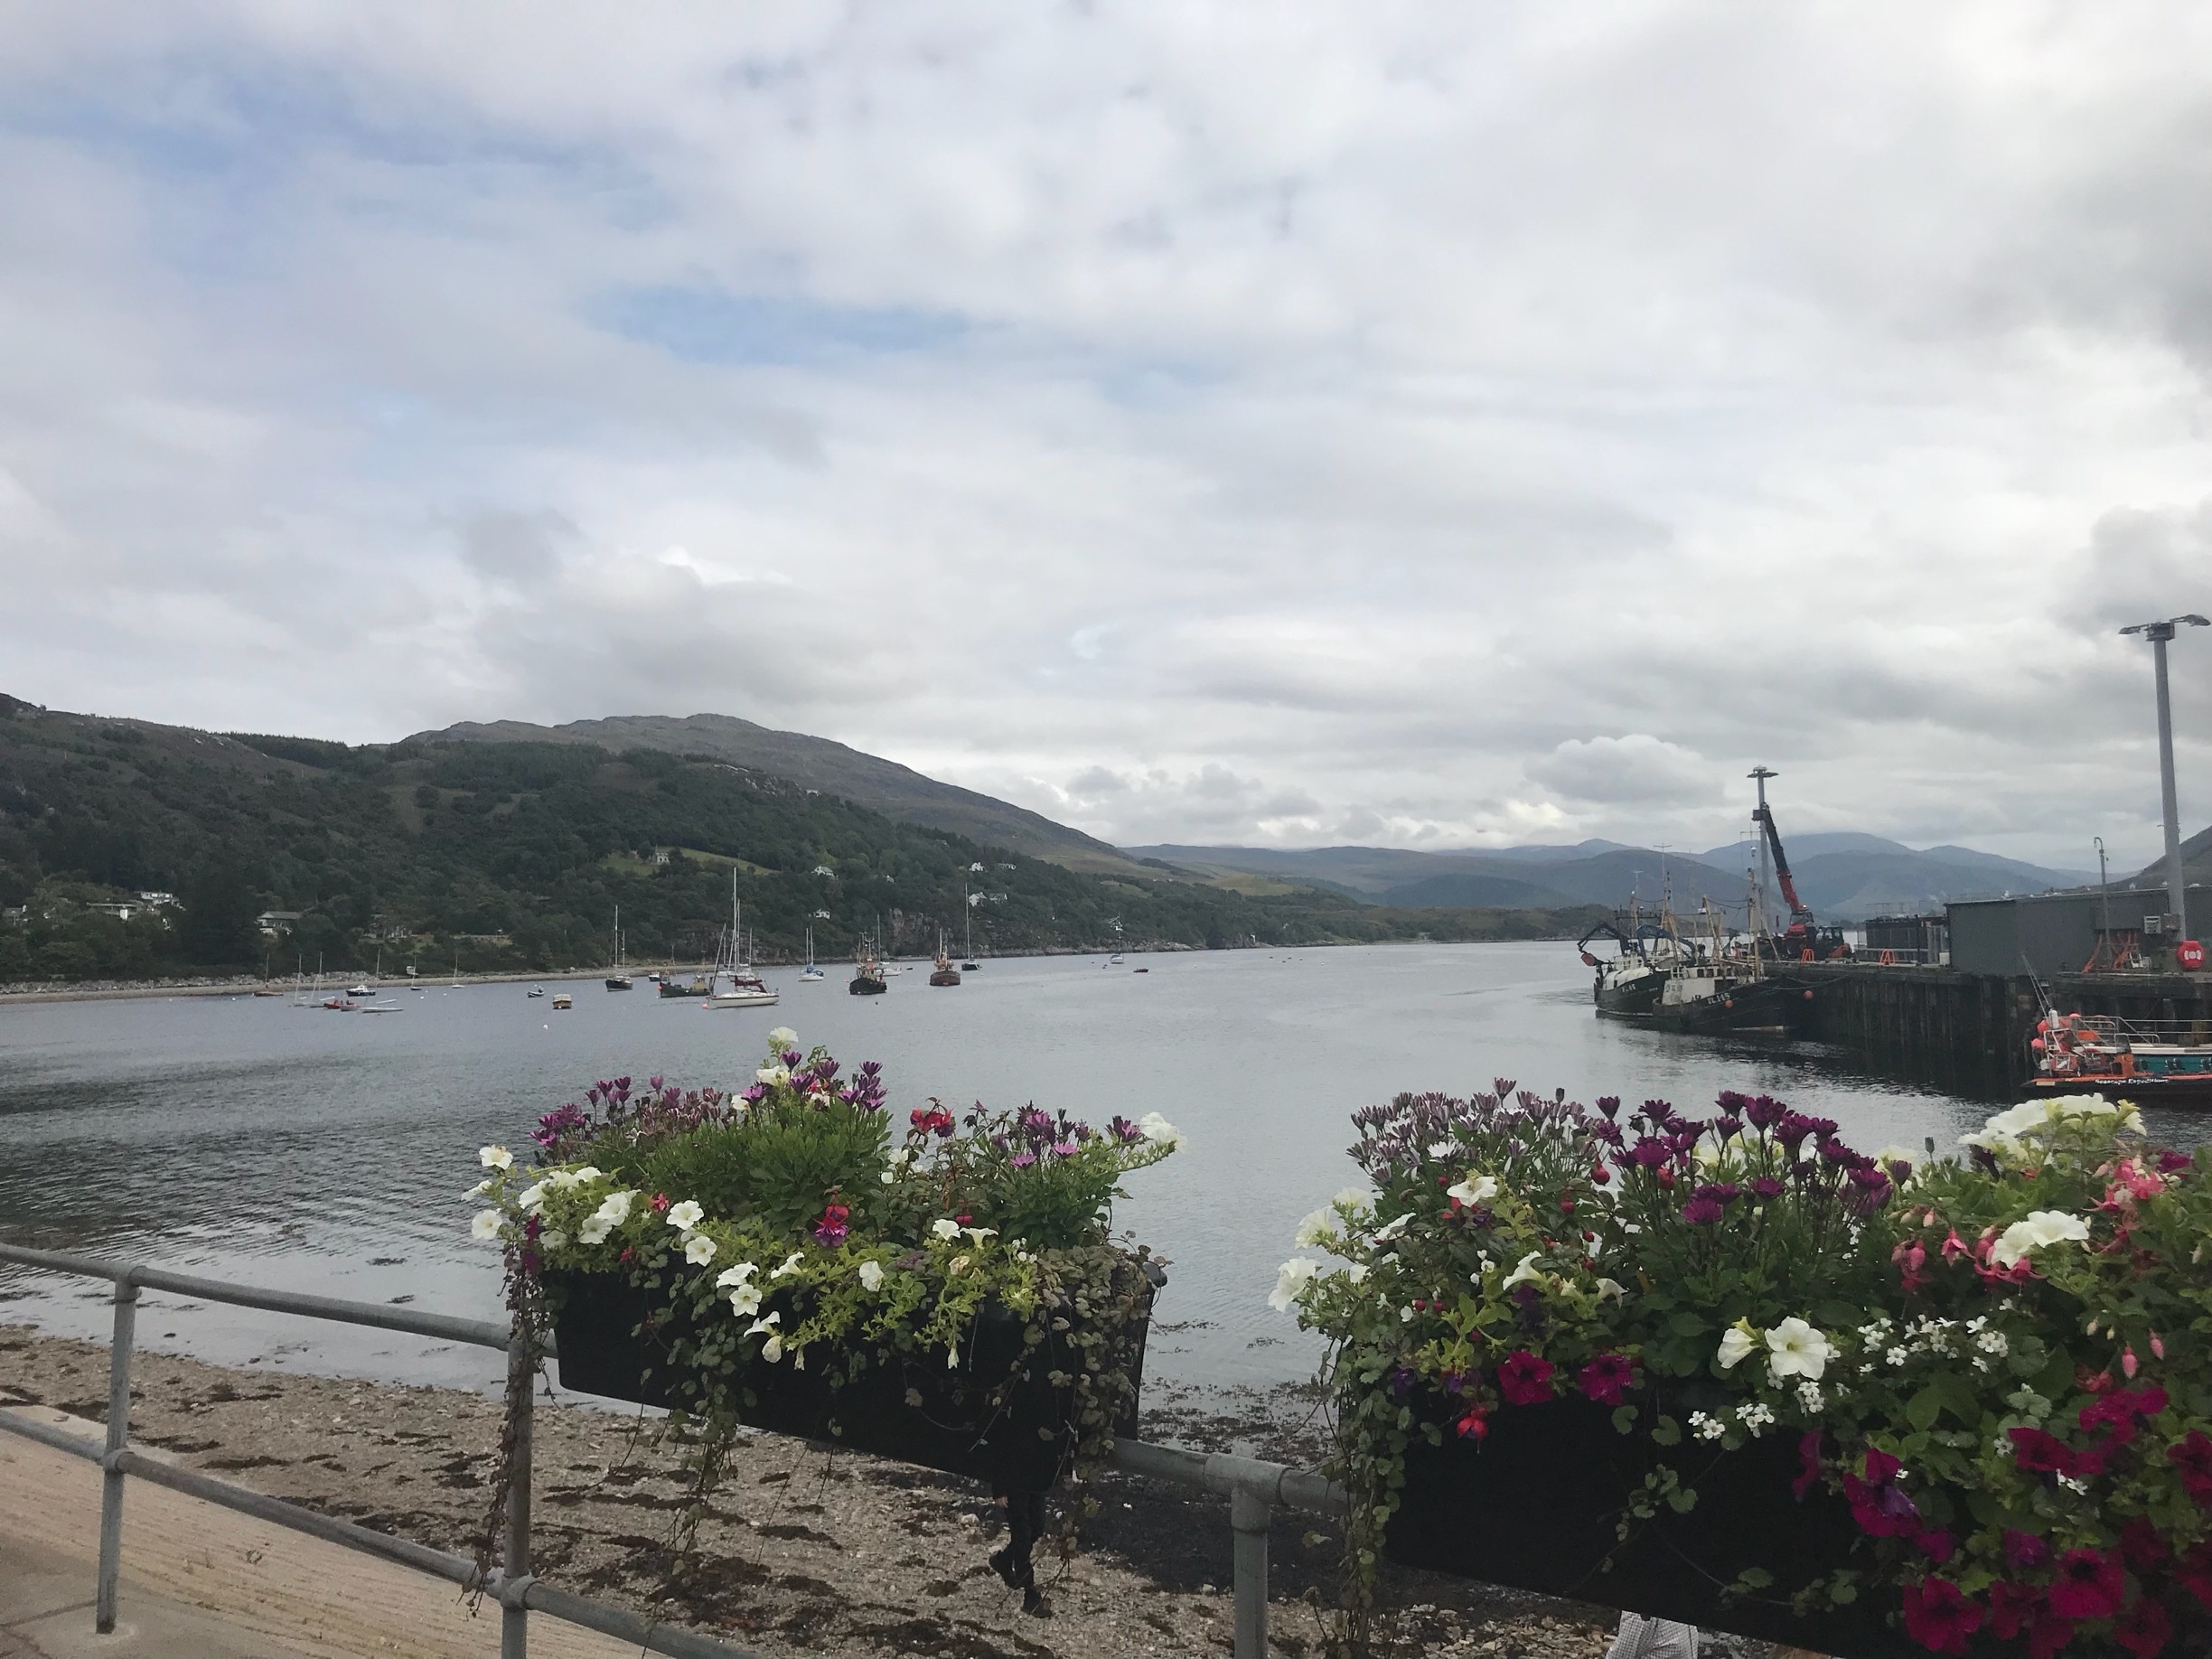 The Best Hotels Closest to Ullapool Harbour - 2021 Updated Prices | Expedia